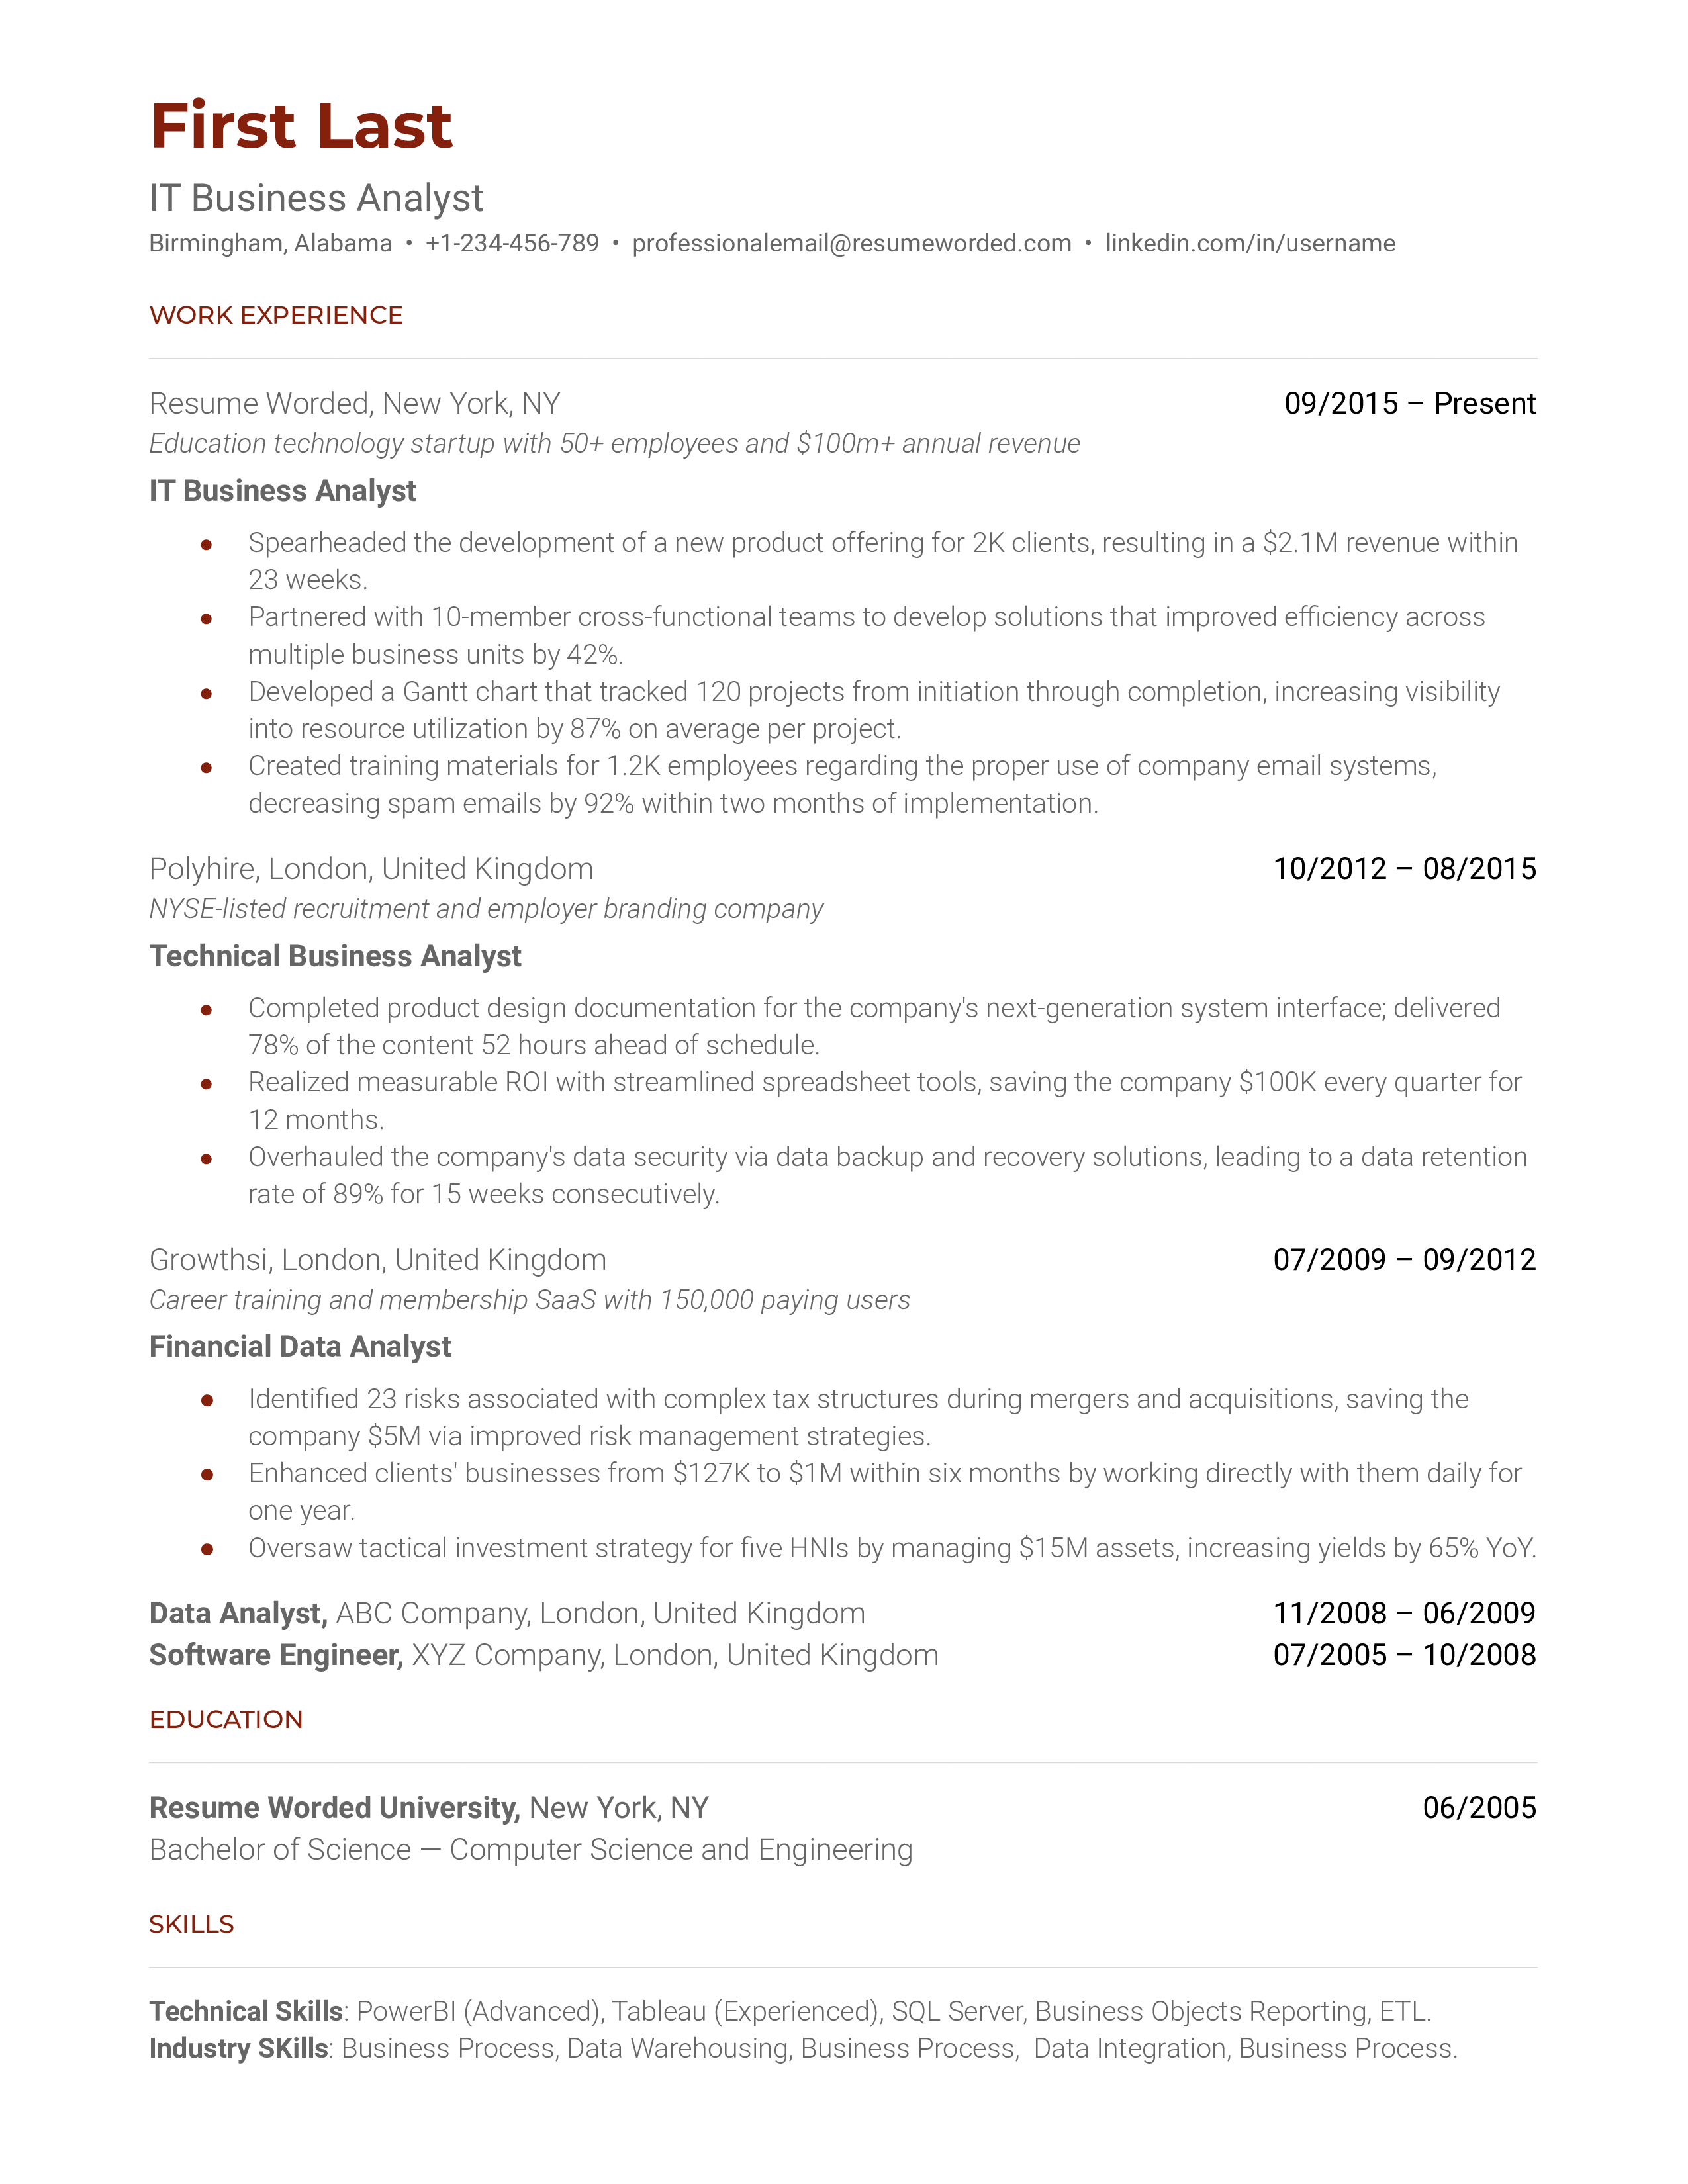 IT Business Analyst Resume Sample